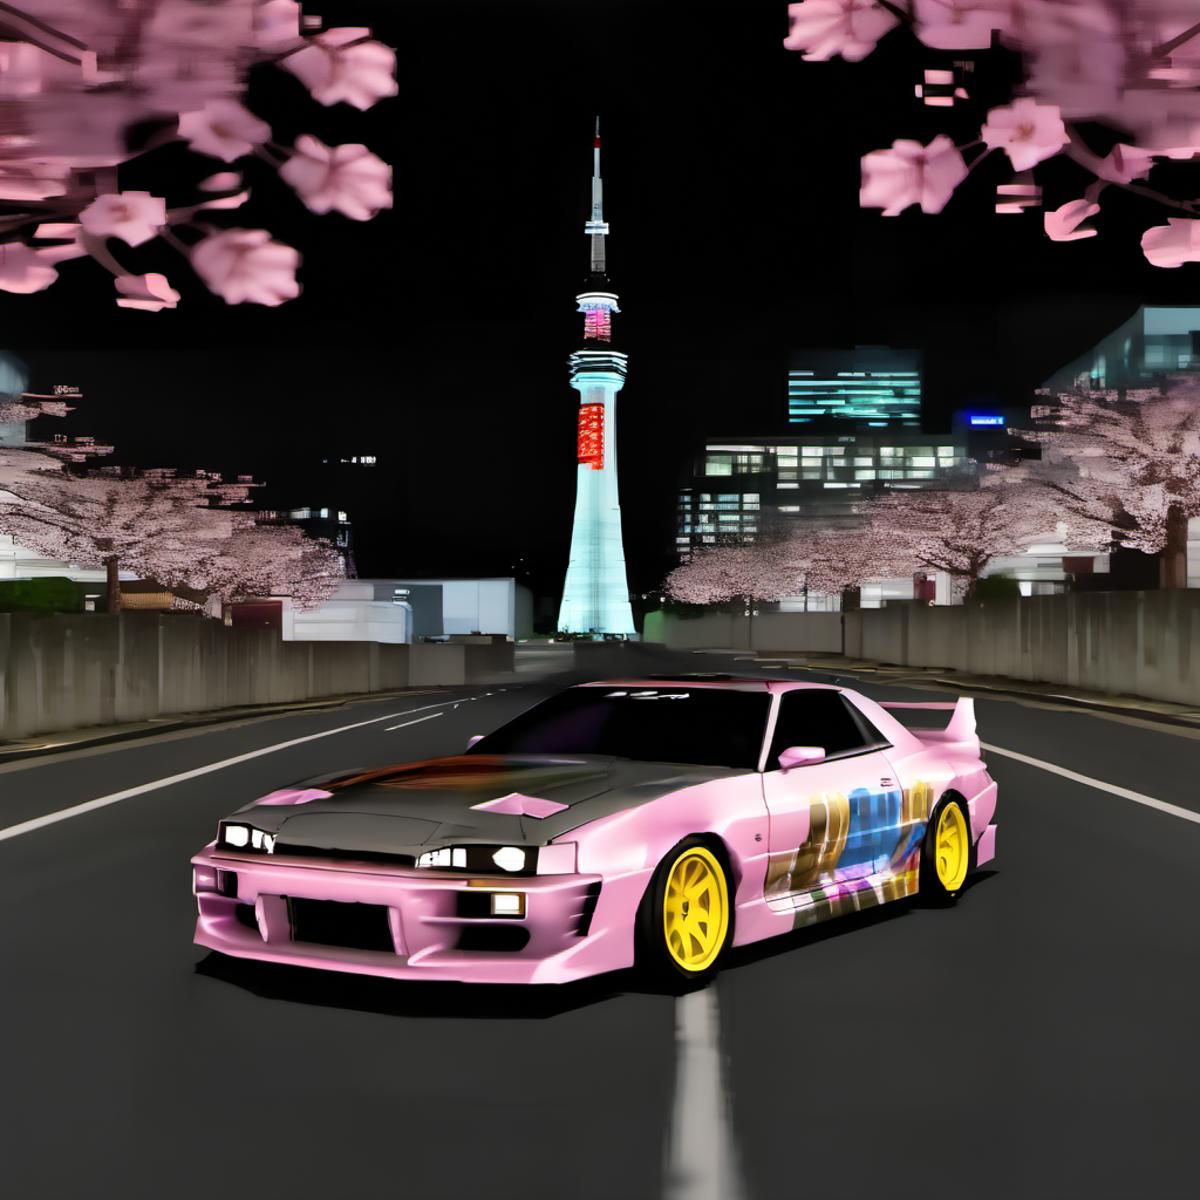 Pink Race Car Driving Down a Road at Night with a Skyscraper in the Background